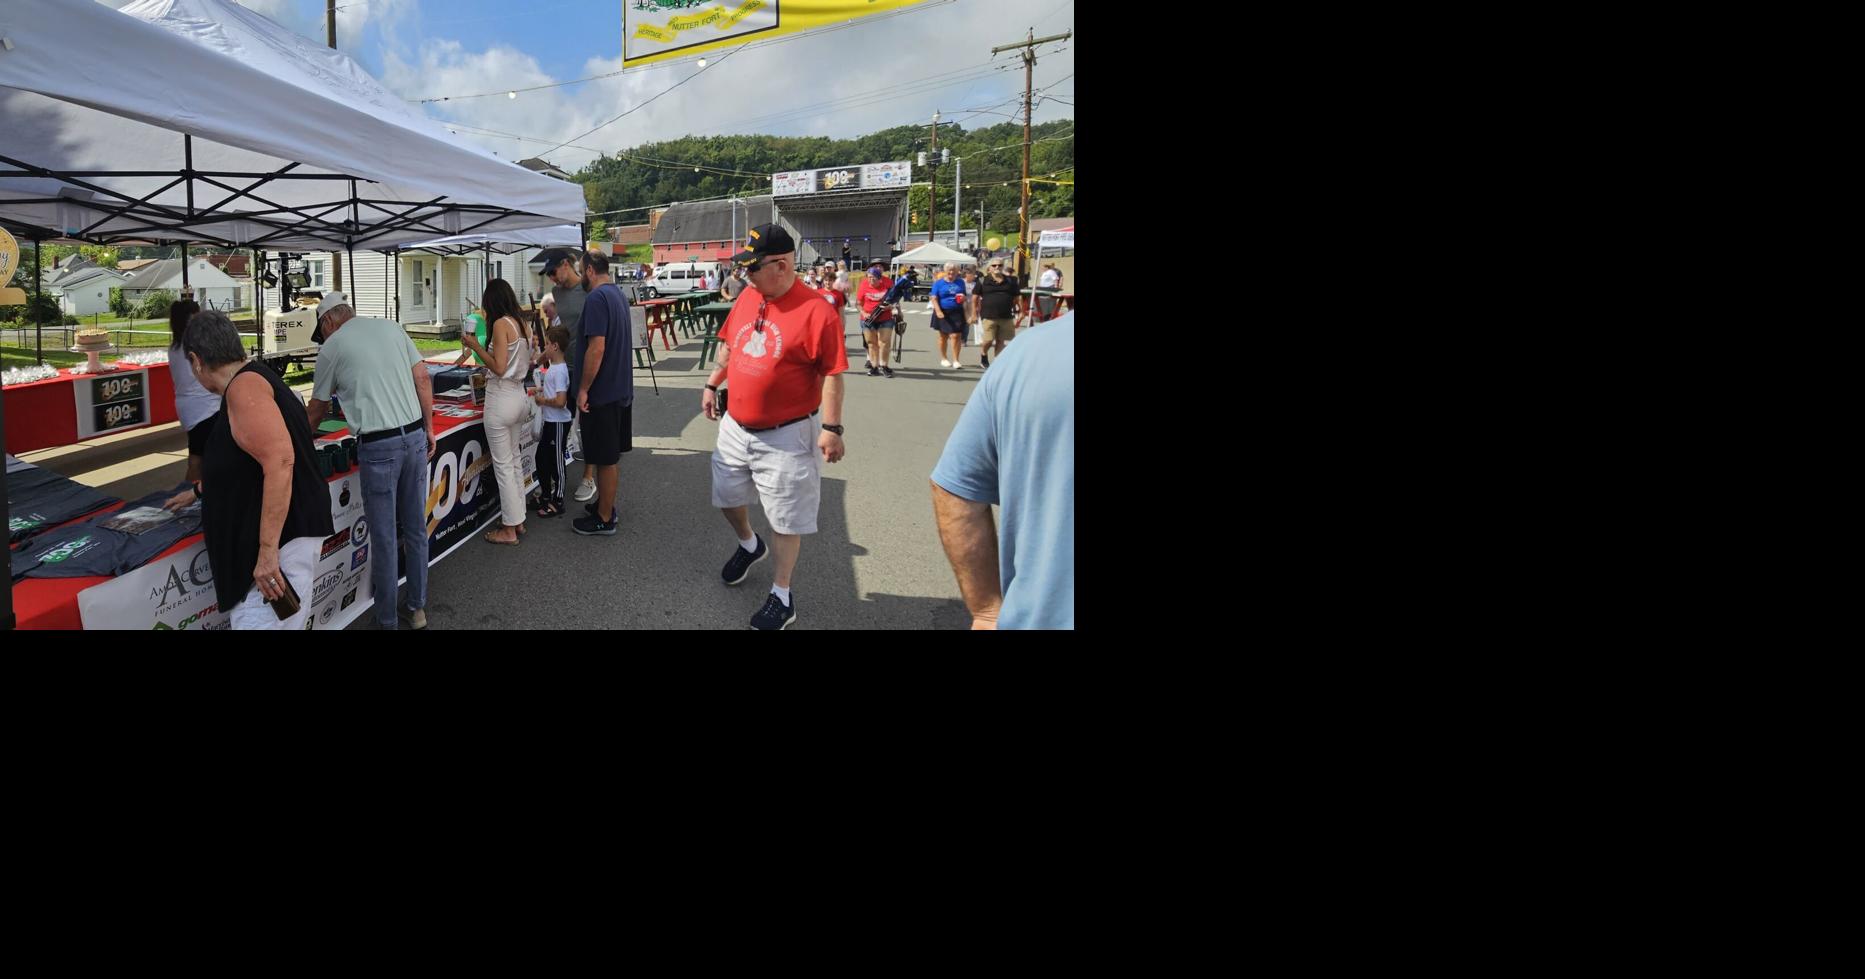 100 year celebration held in Nutter Fort, West Virginia, featuring parade, games, vendors, music and fireworks | Local News for Harrison County